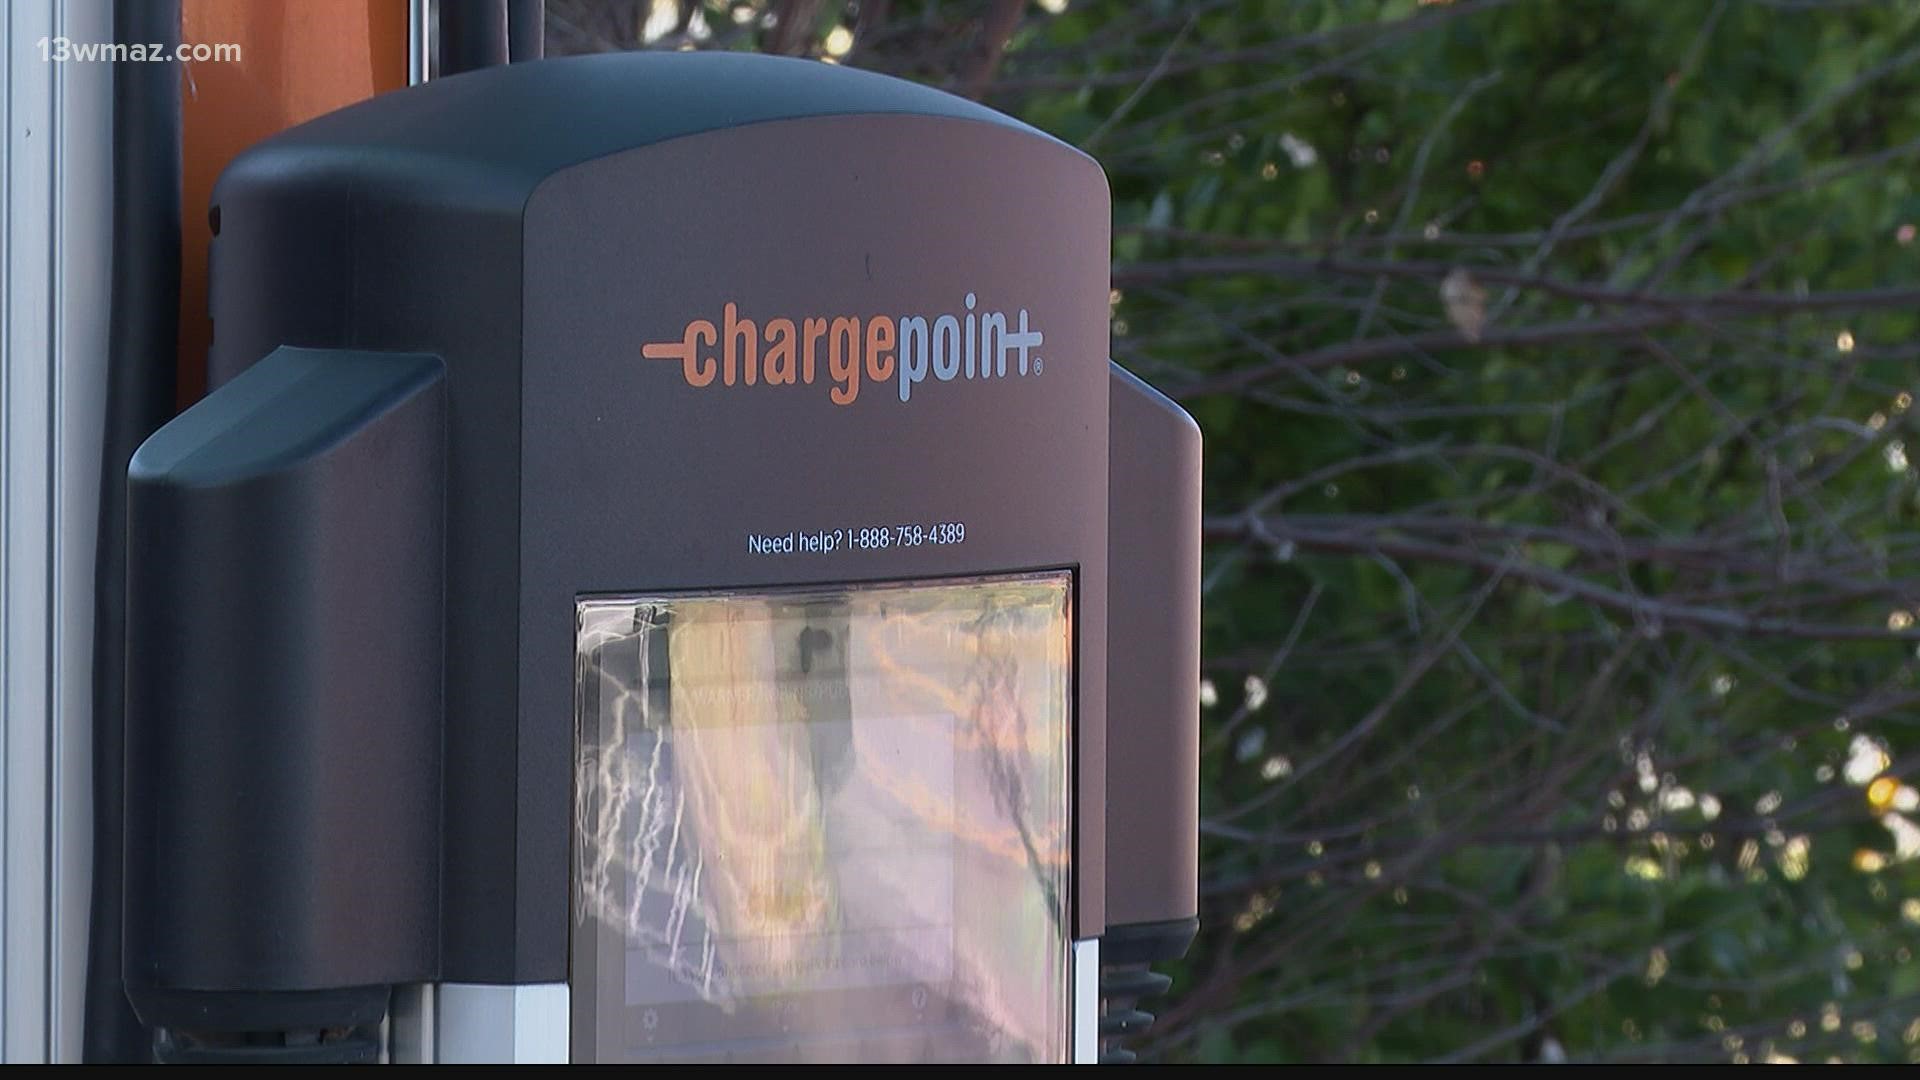 The Warner Robins city council is working to develop a larger charging network for electric cars.